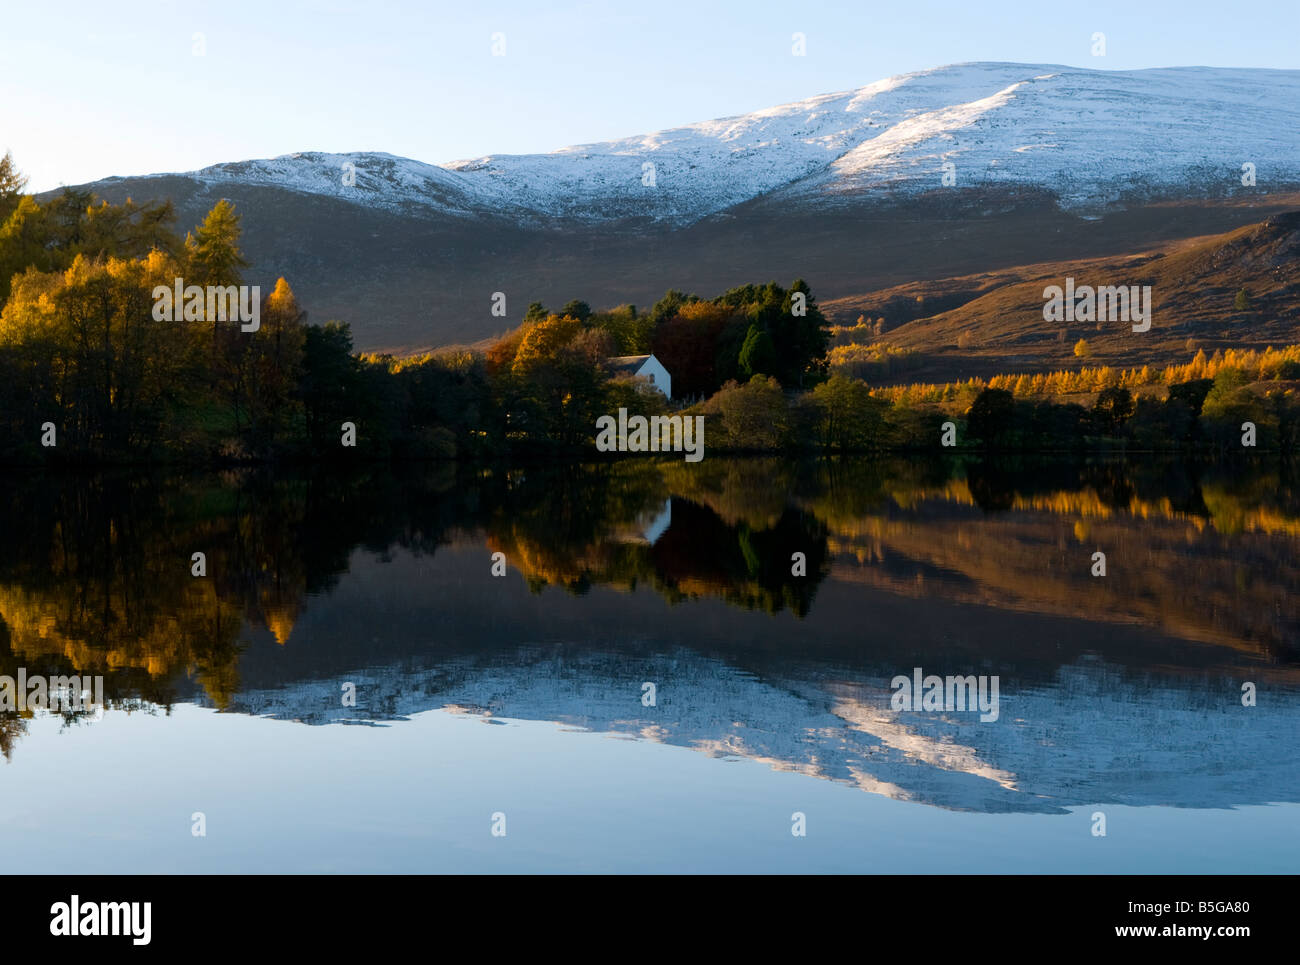 Loch Alvie showing Autumn colours and calm reflection of snowy mountains Stock Photo